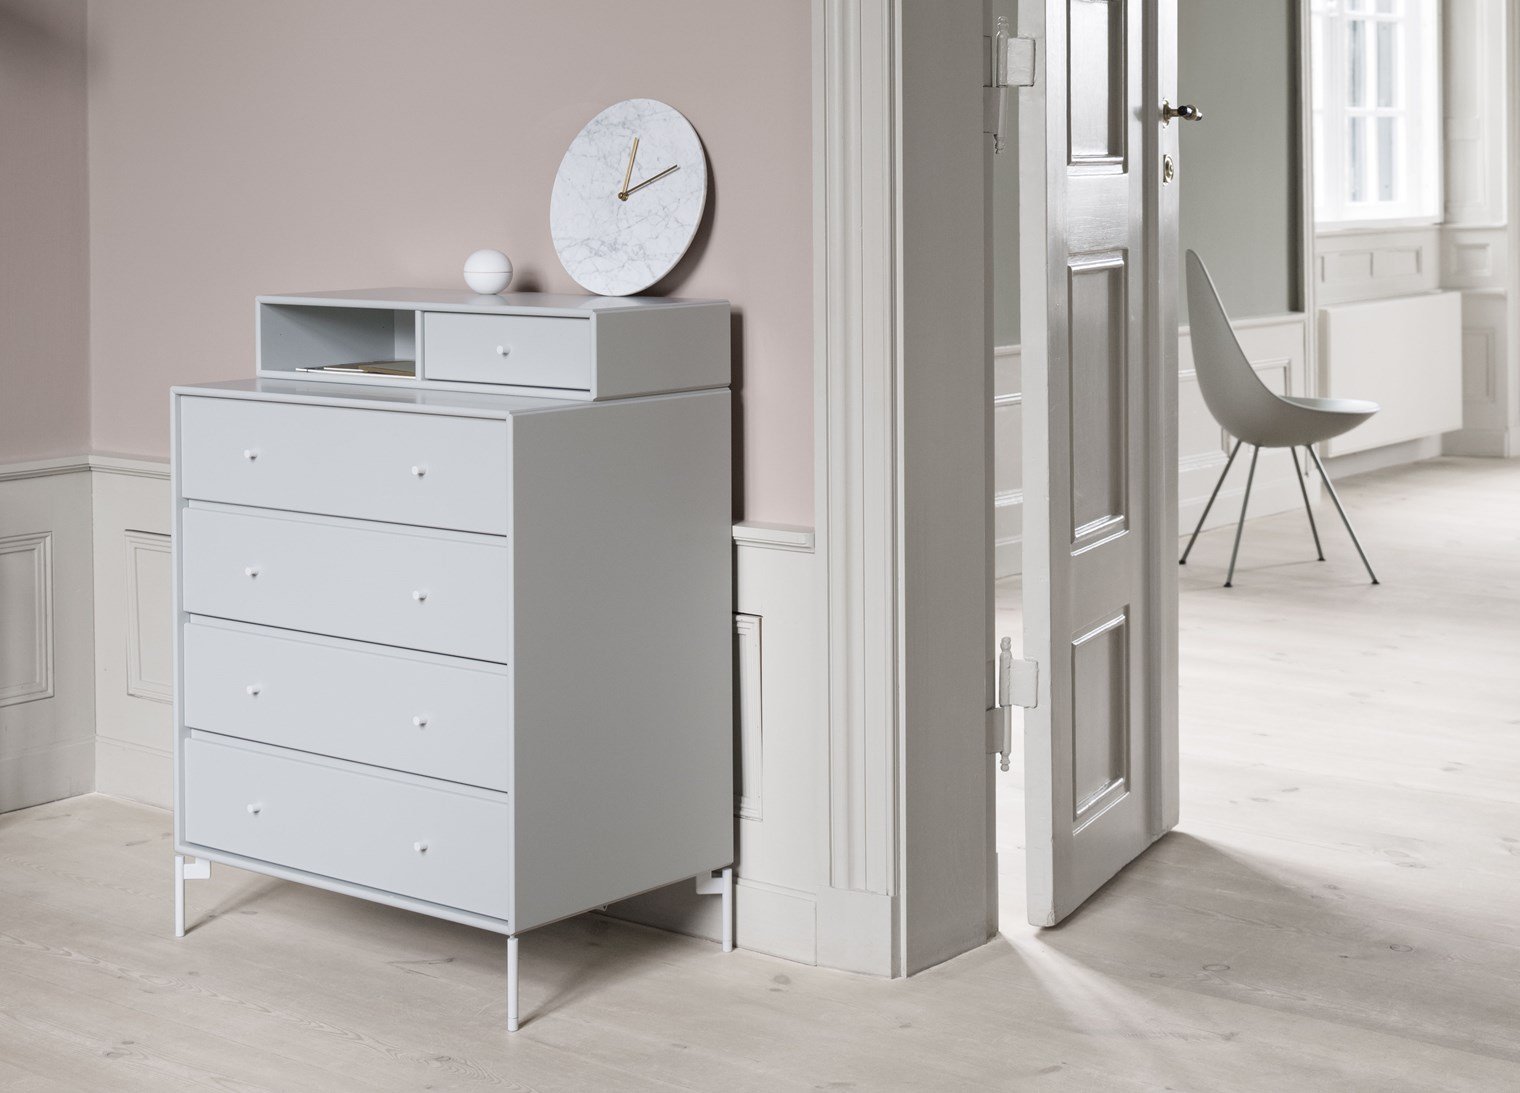 Montana Keep Chest Of Drawers With Suspension Rail, Mist